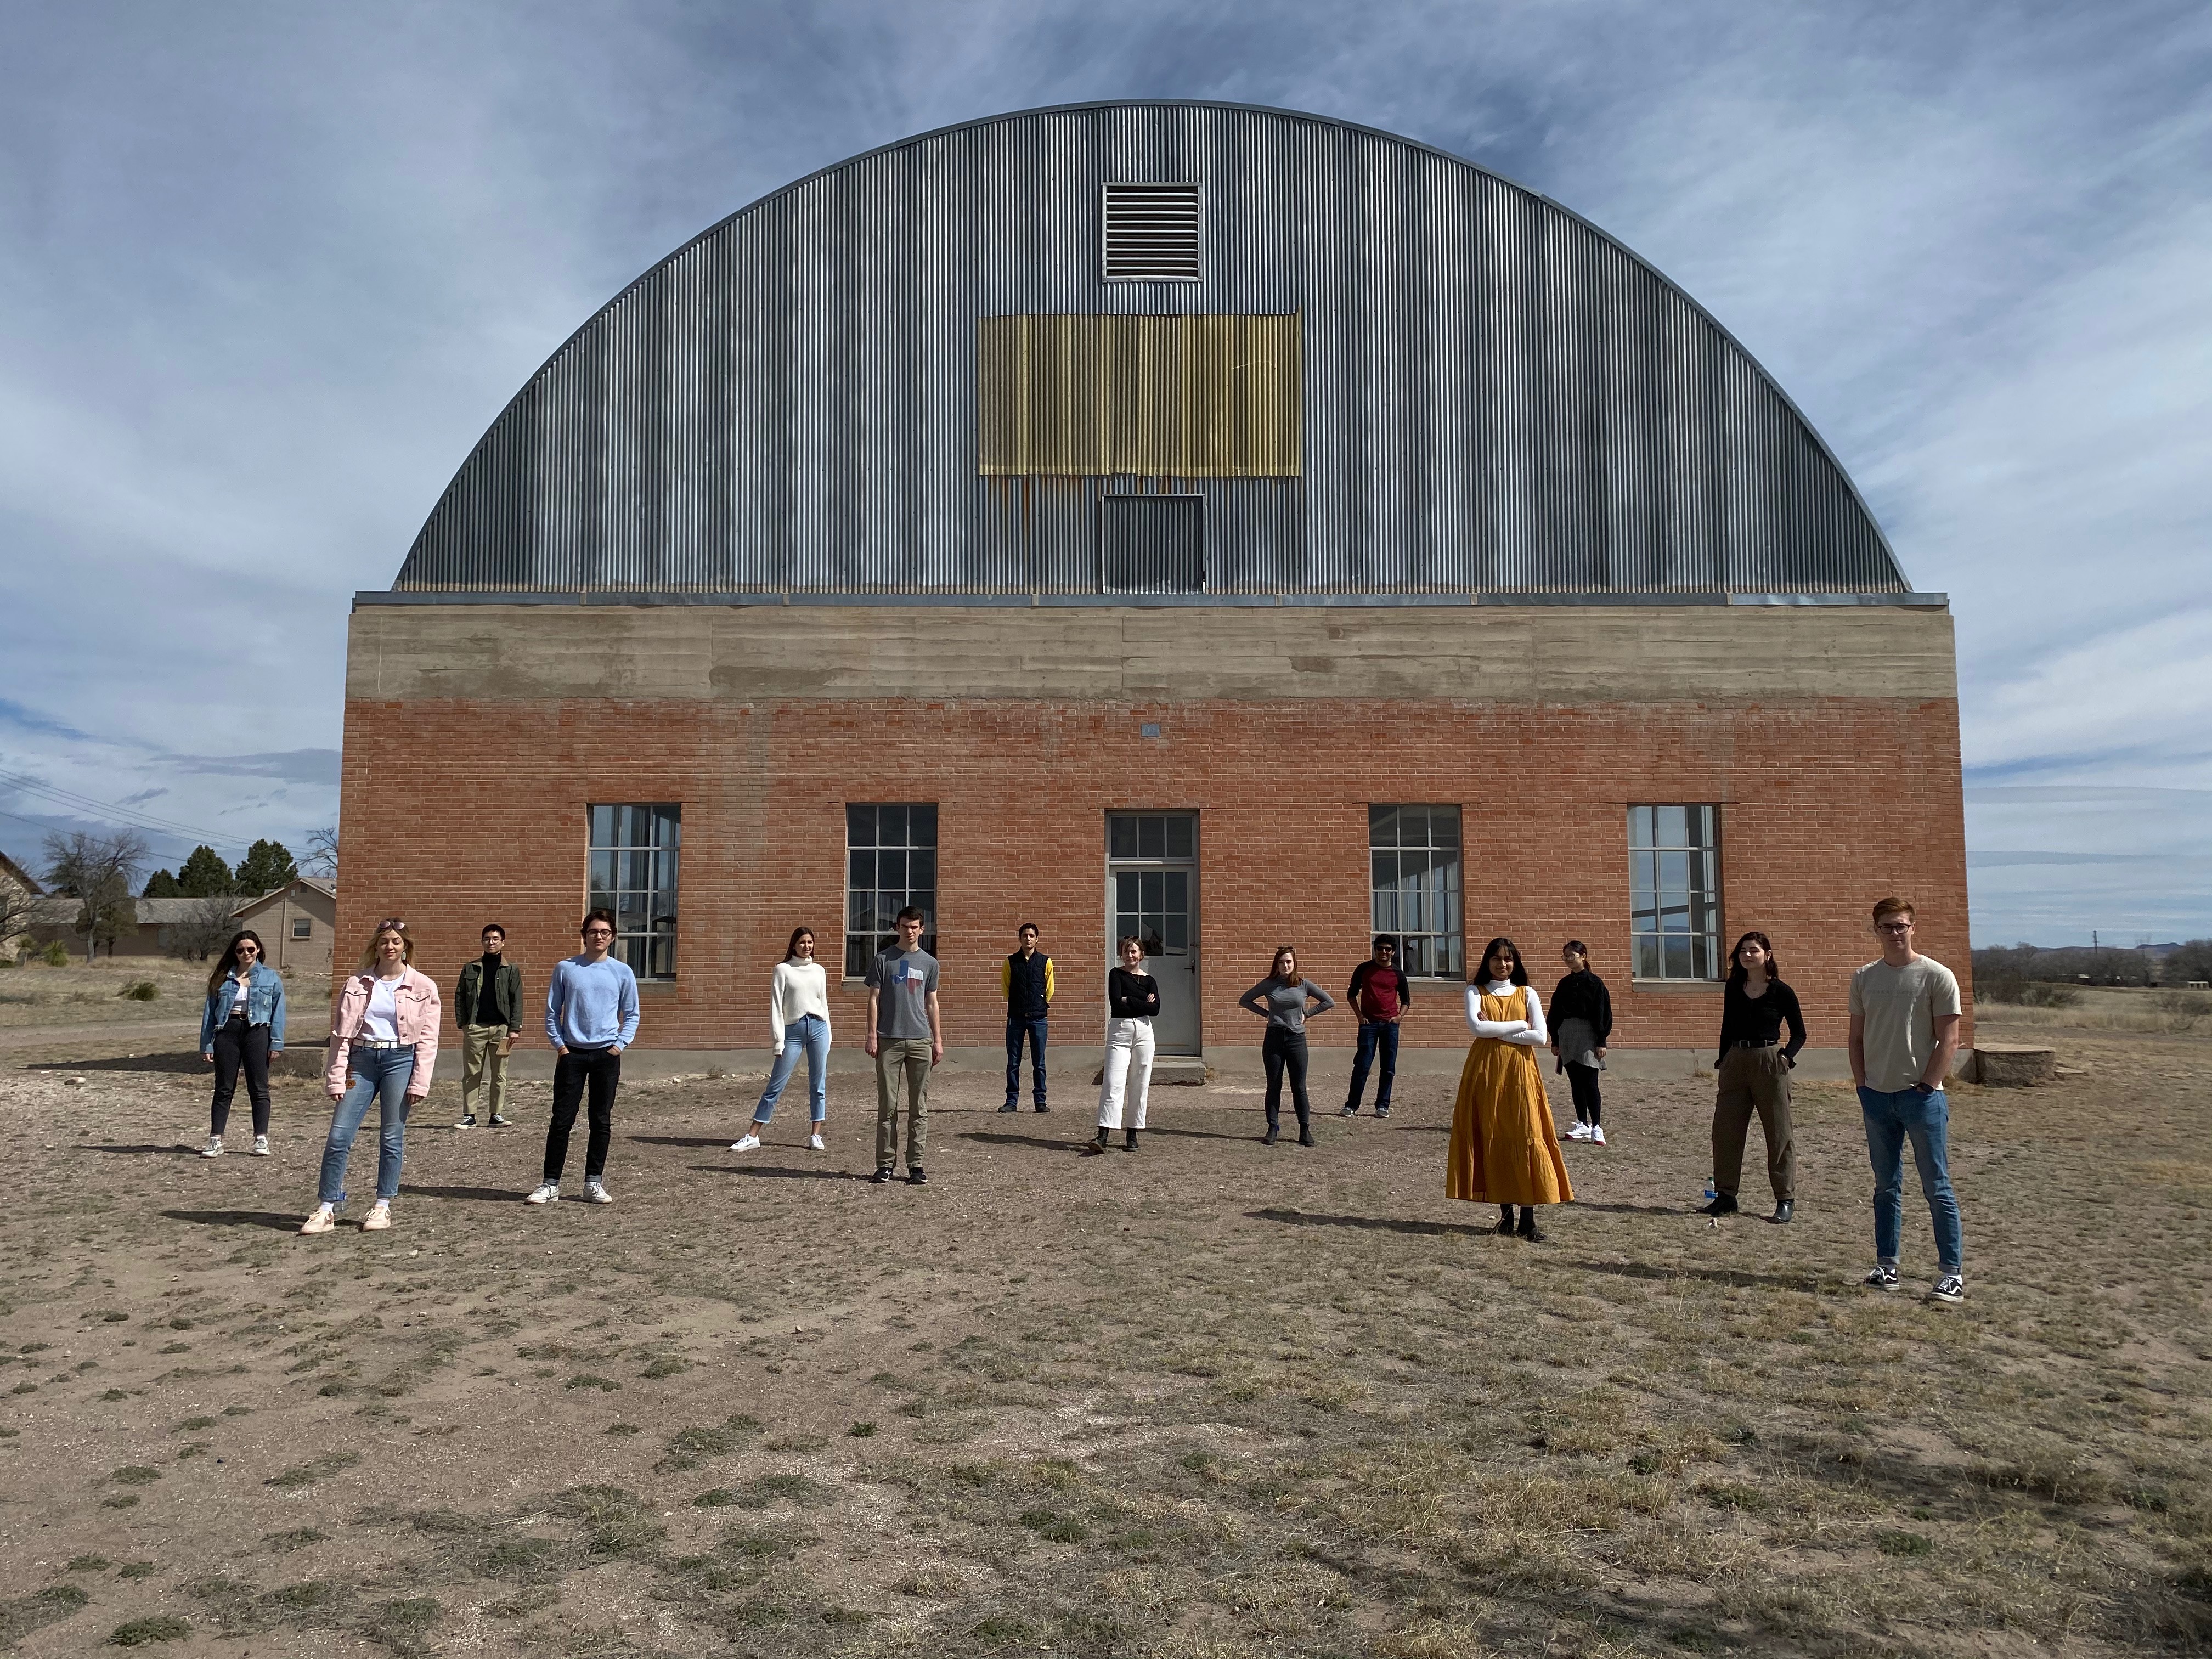 Students standing interspersed in front of a round-topped building in West Texas